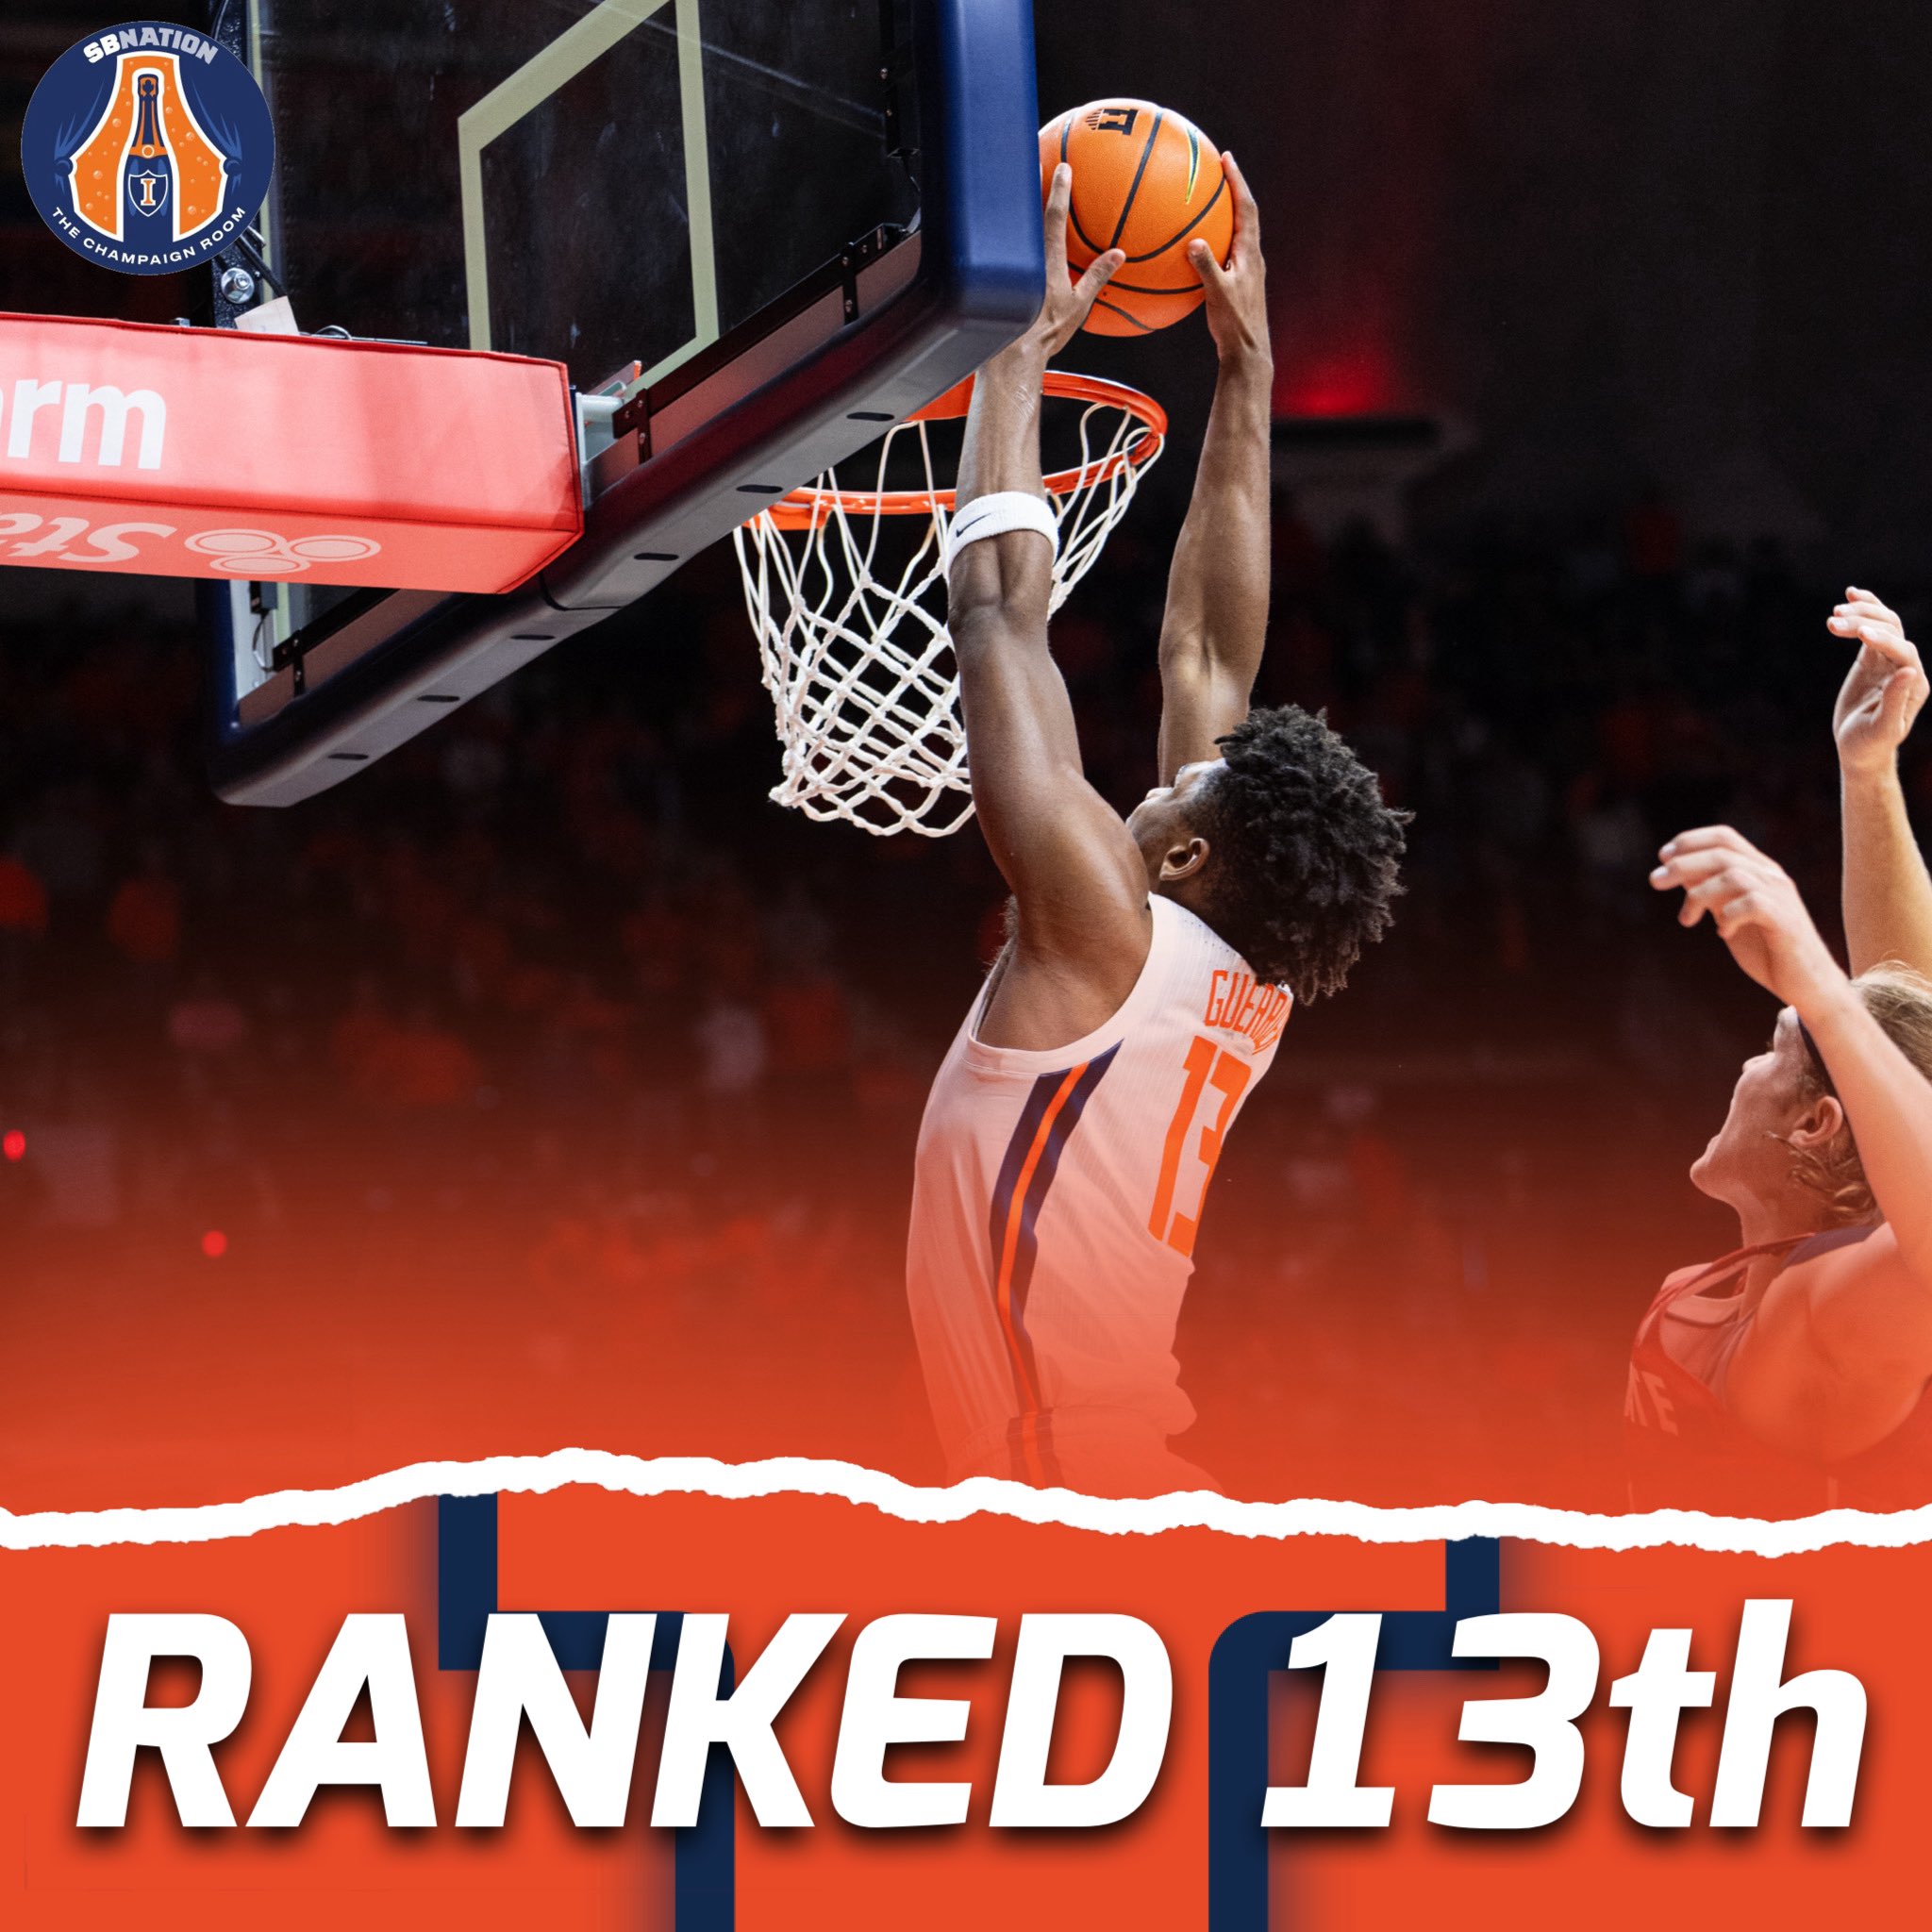 Illinois inches up in new AP poll - The Champaign Room